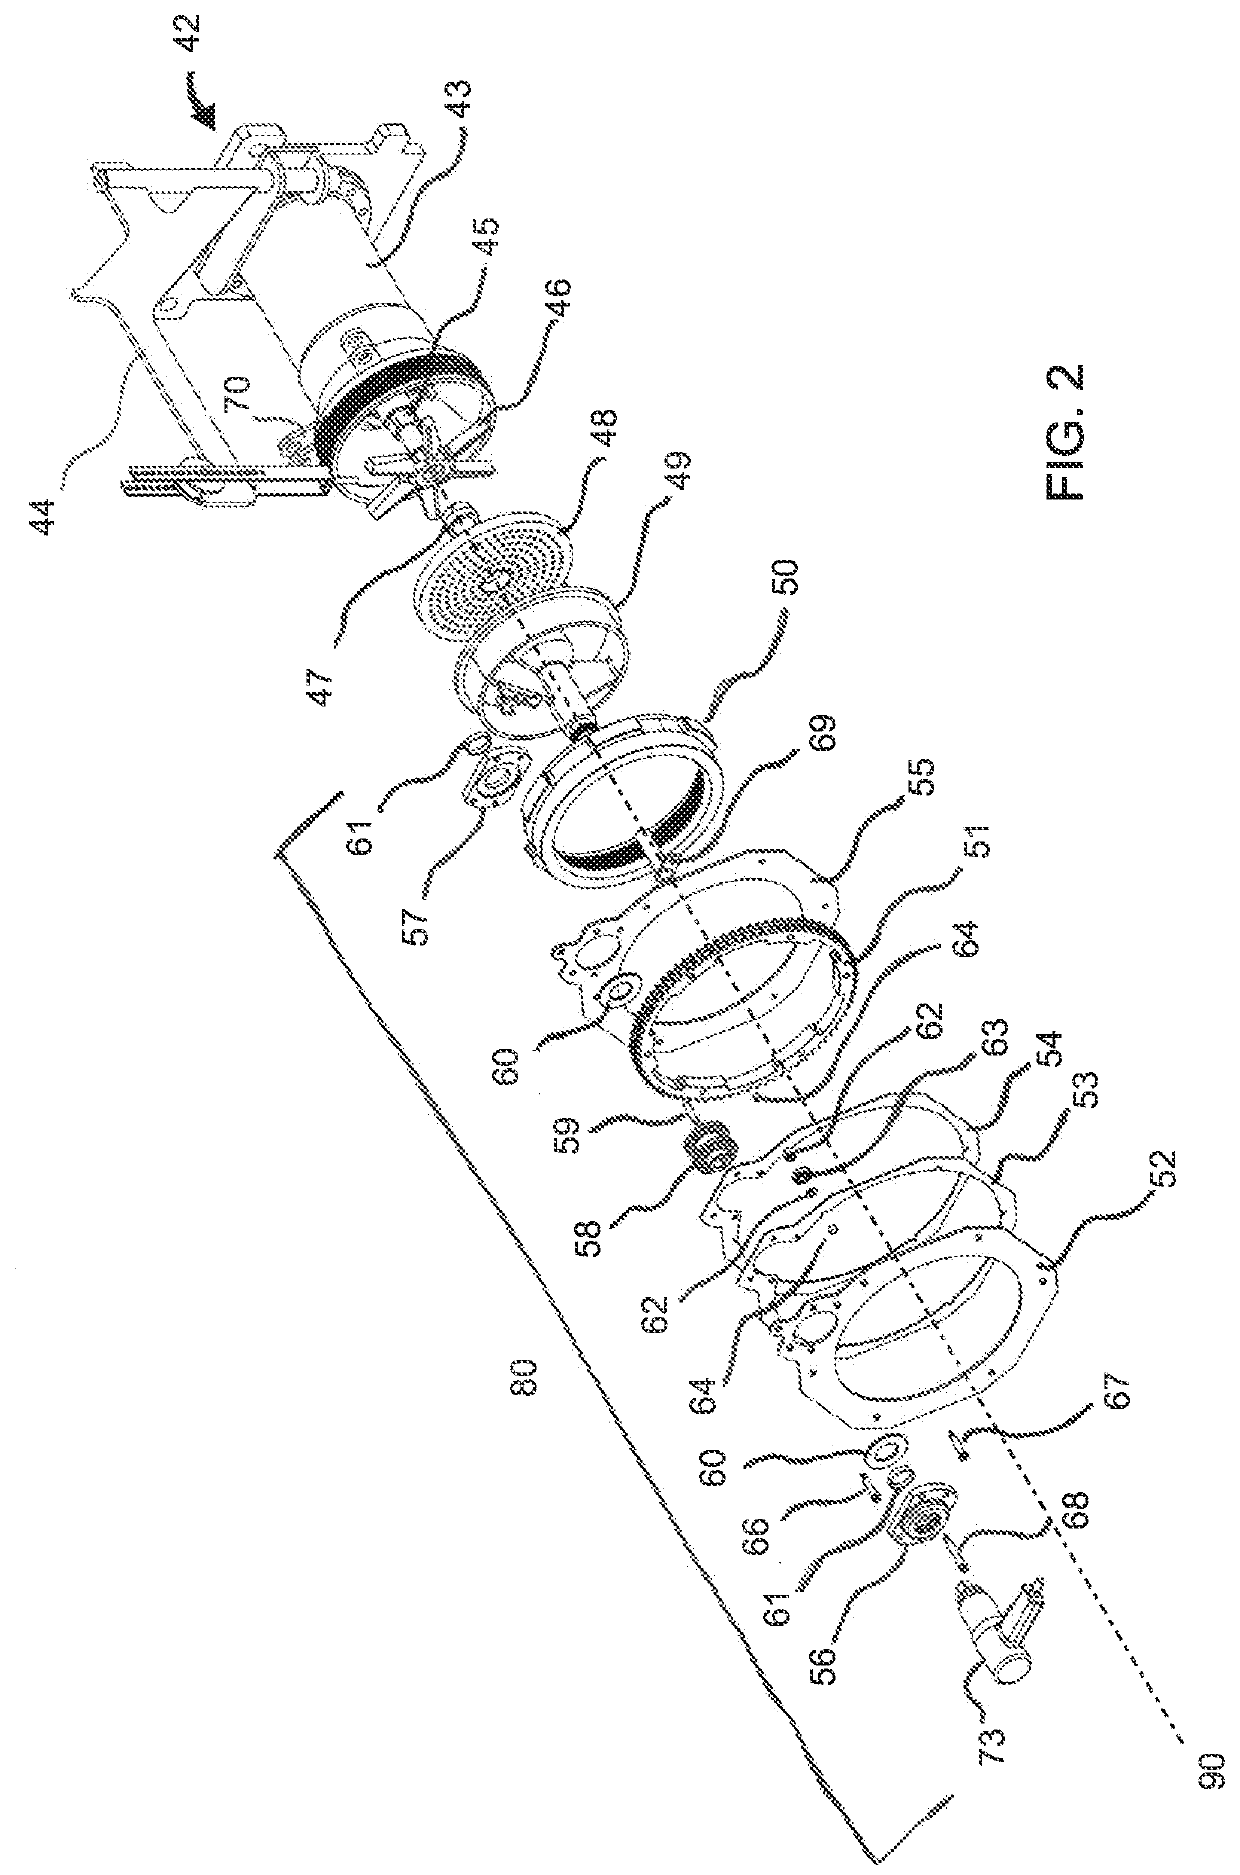 Mounting ring installation system for a meat grinding system